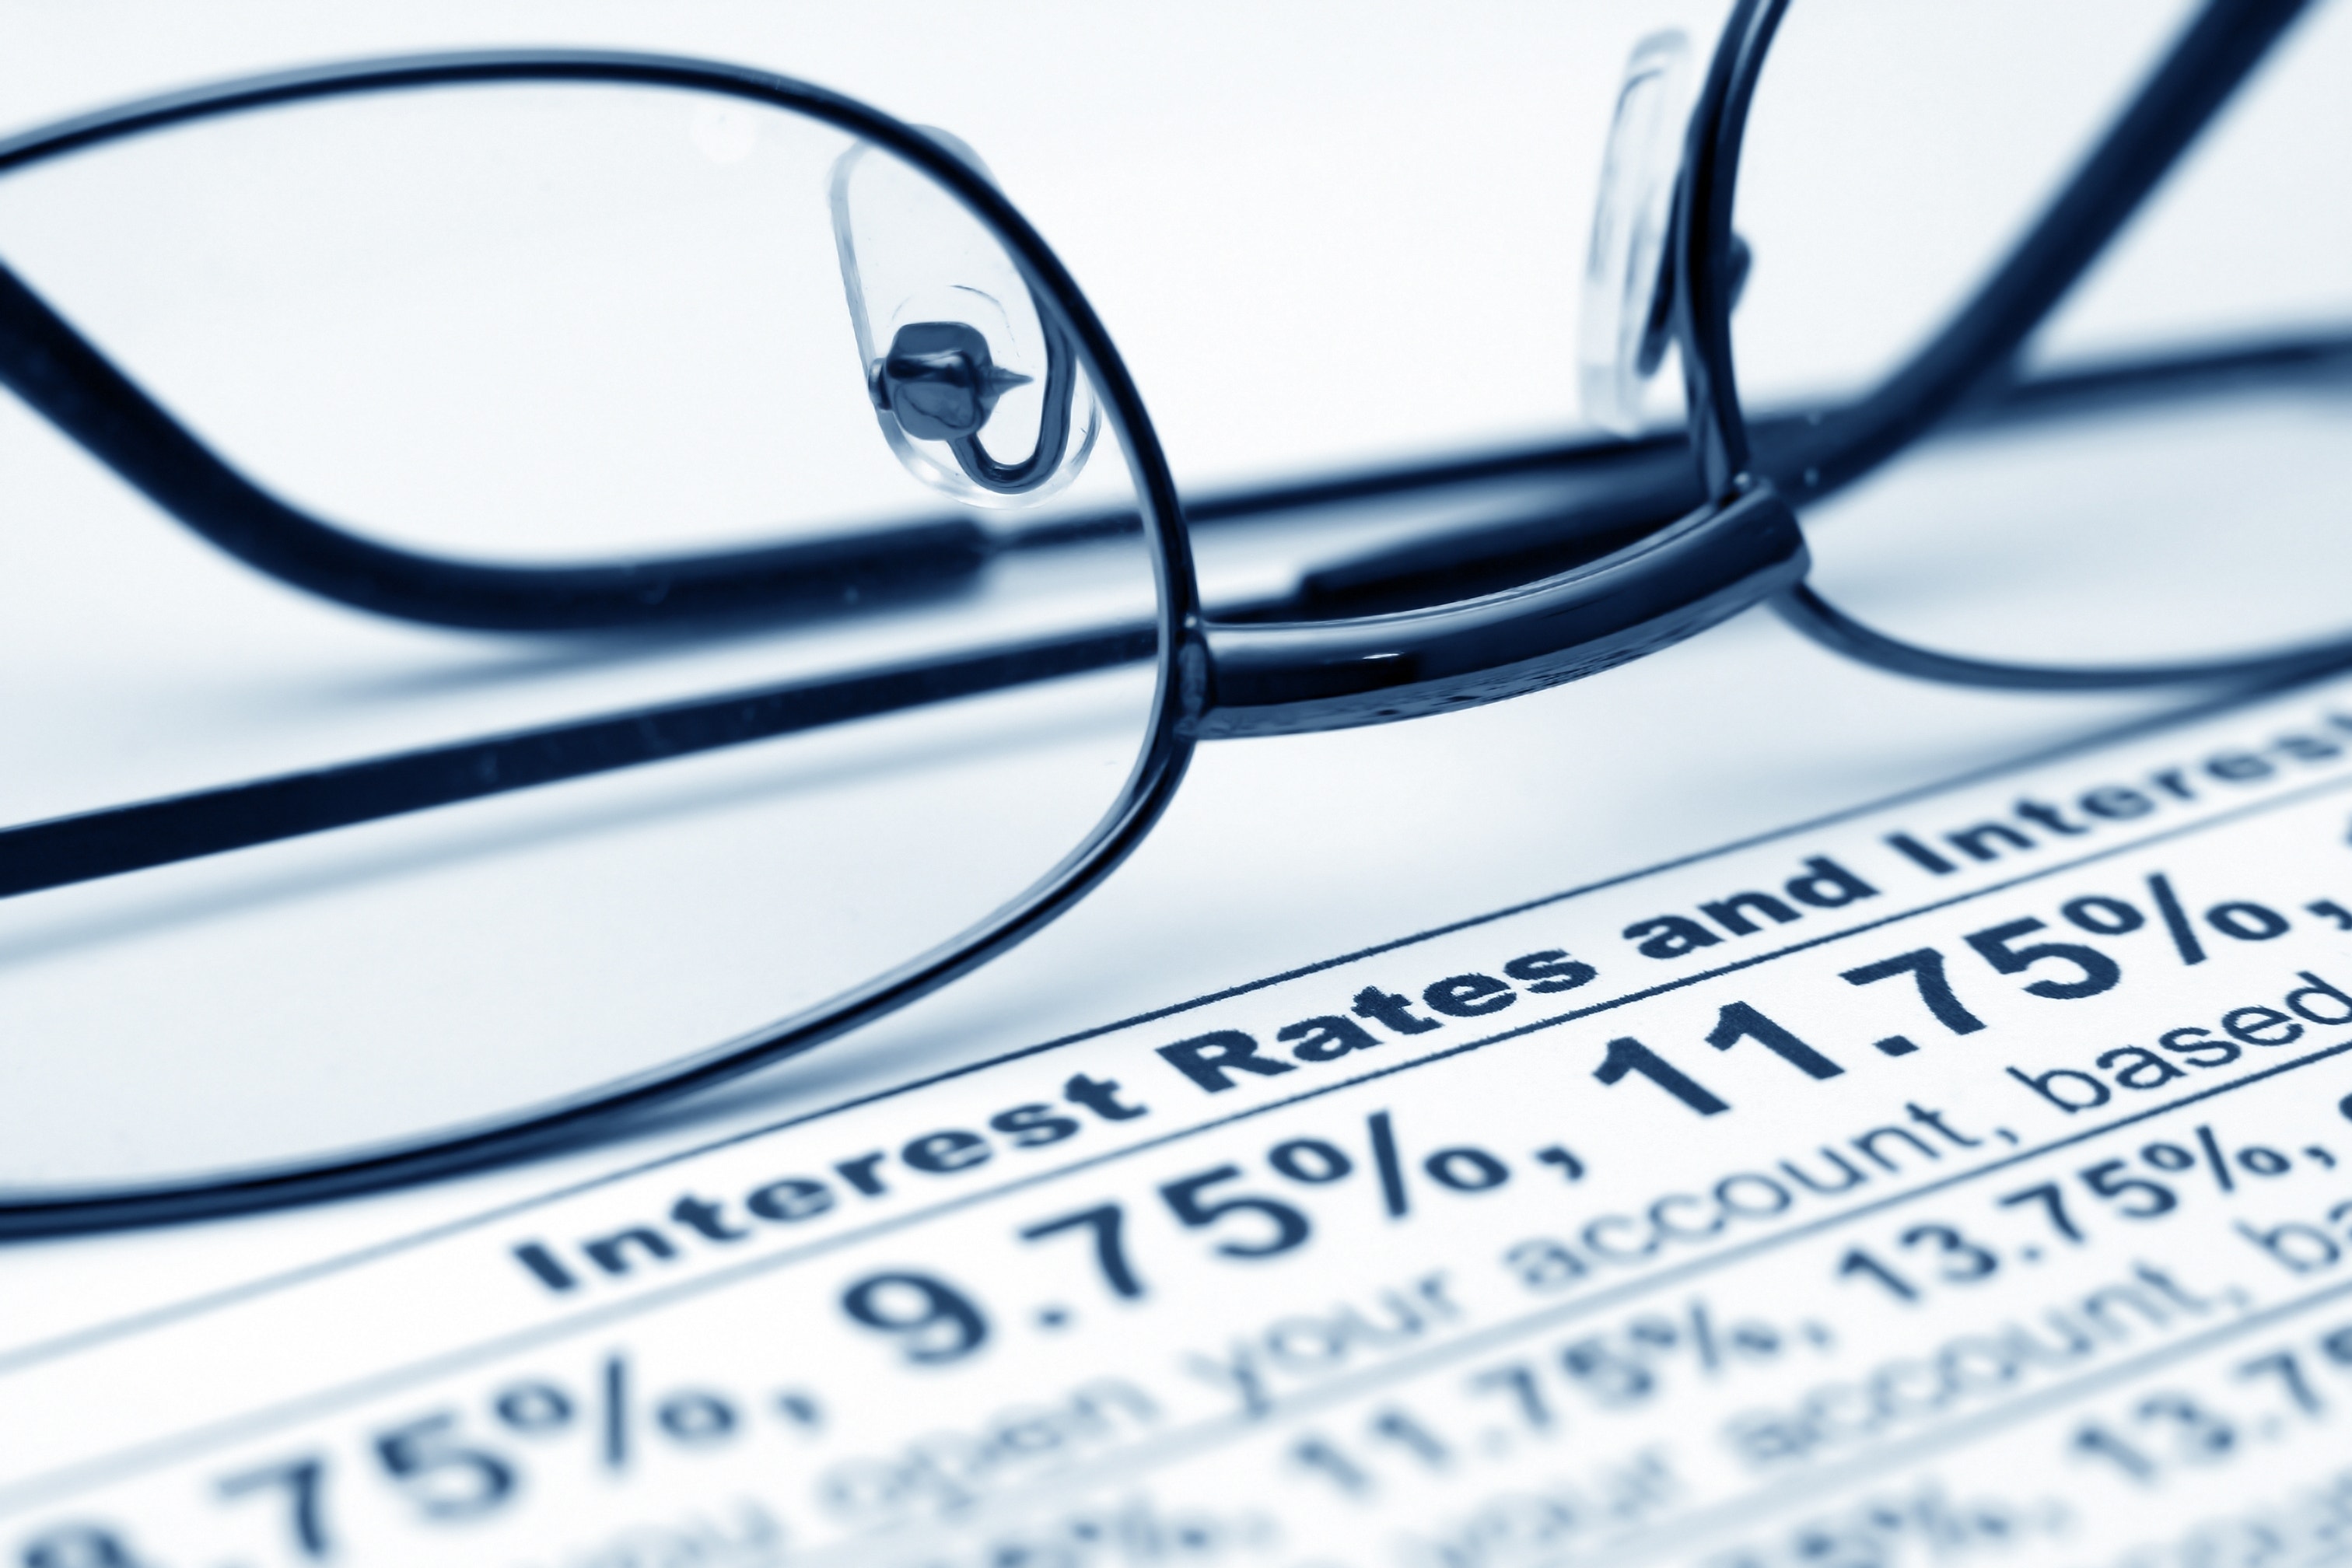 Nervous About Interest Rate Hikes? These 3 Under-the-Radar, Tax-Advantaged Securities Offer Yield Up to 14%+